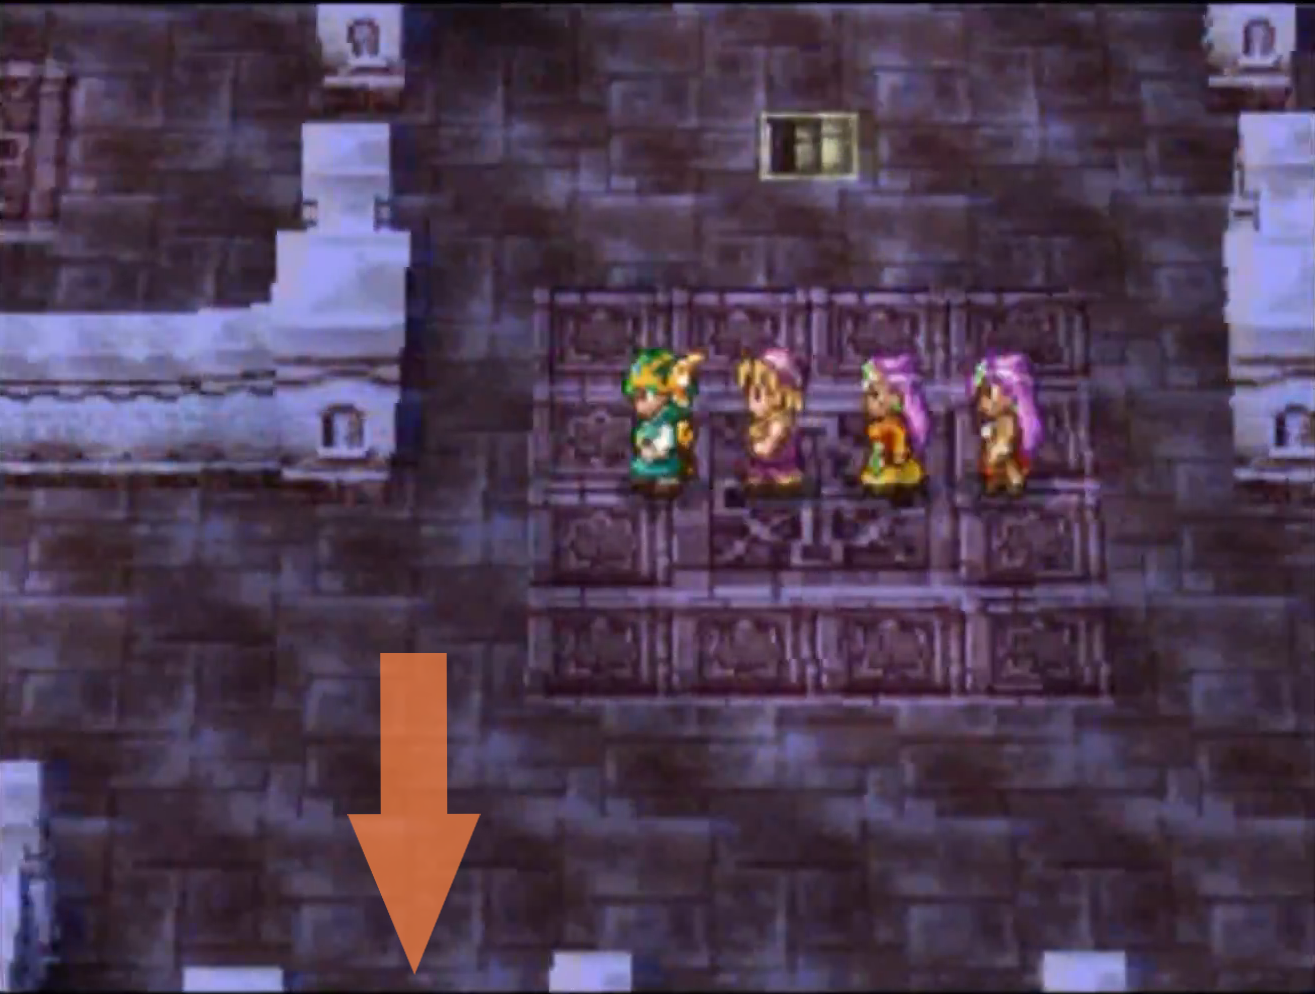 Find both chests and then go up to the next floor (3) | Dragon Quest IV